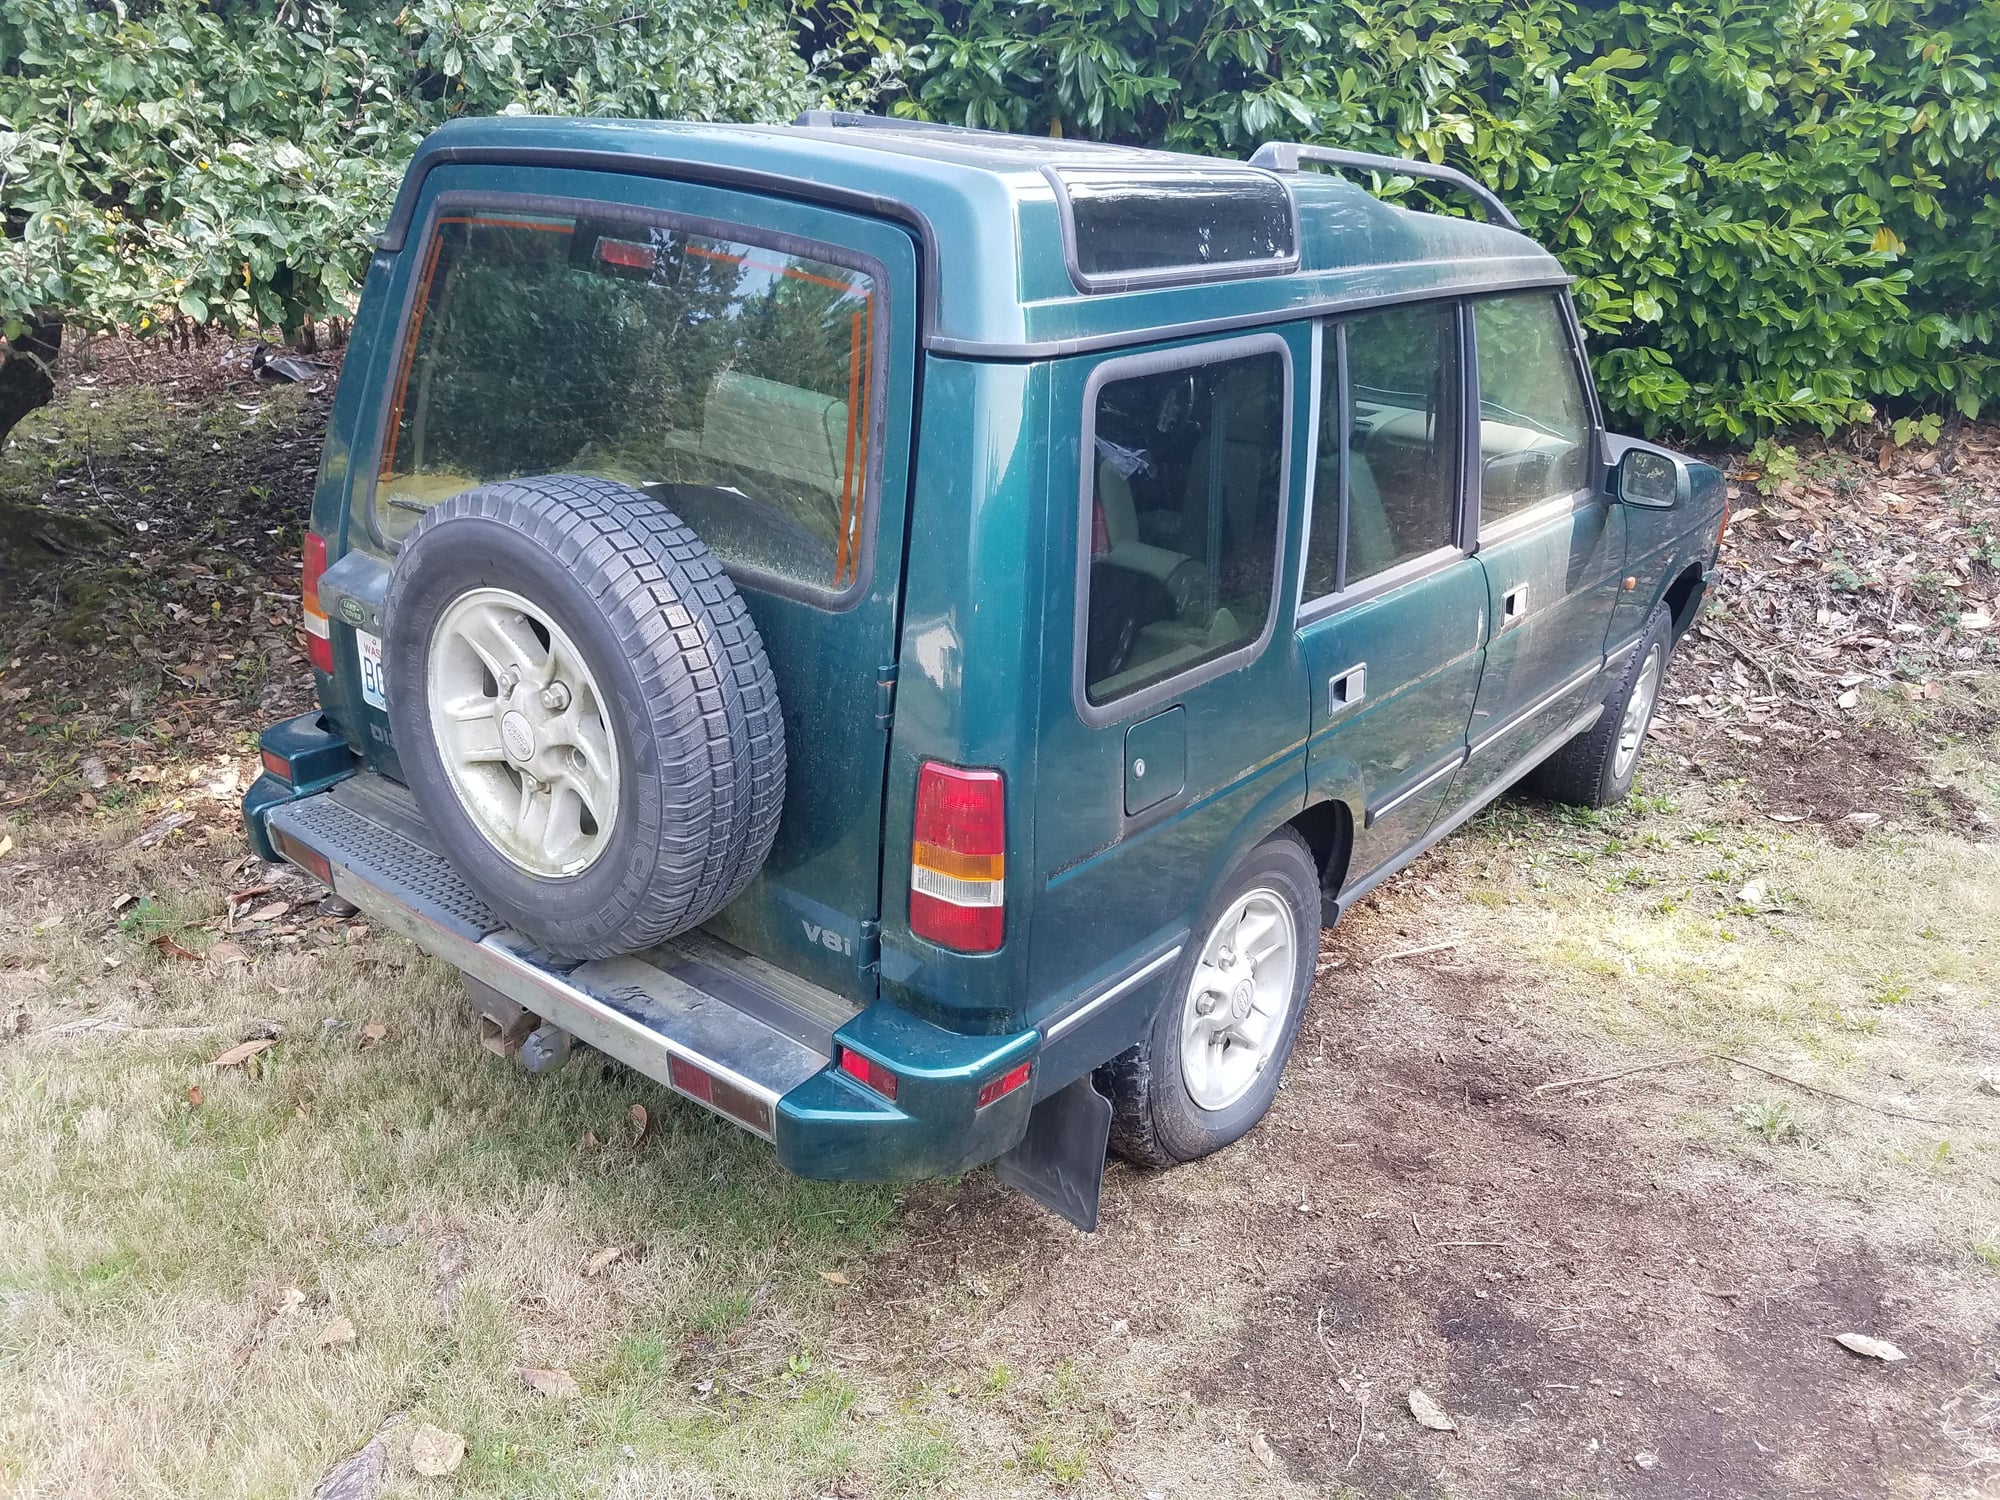 FS 1998 D1 w/ Great Interior Land Rover Forums Land